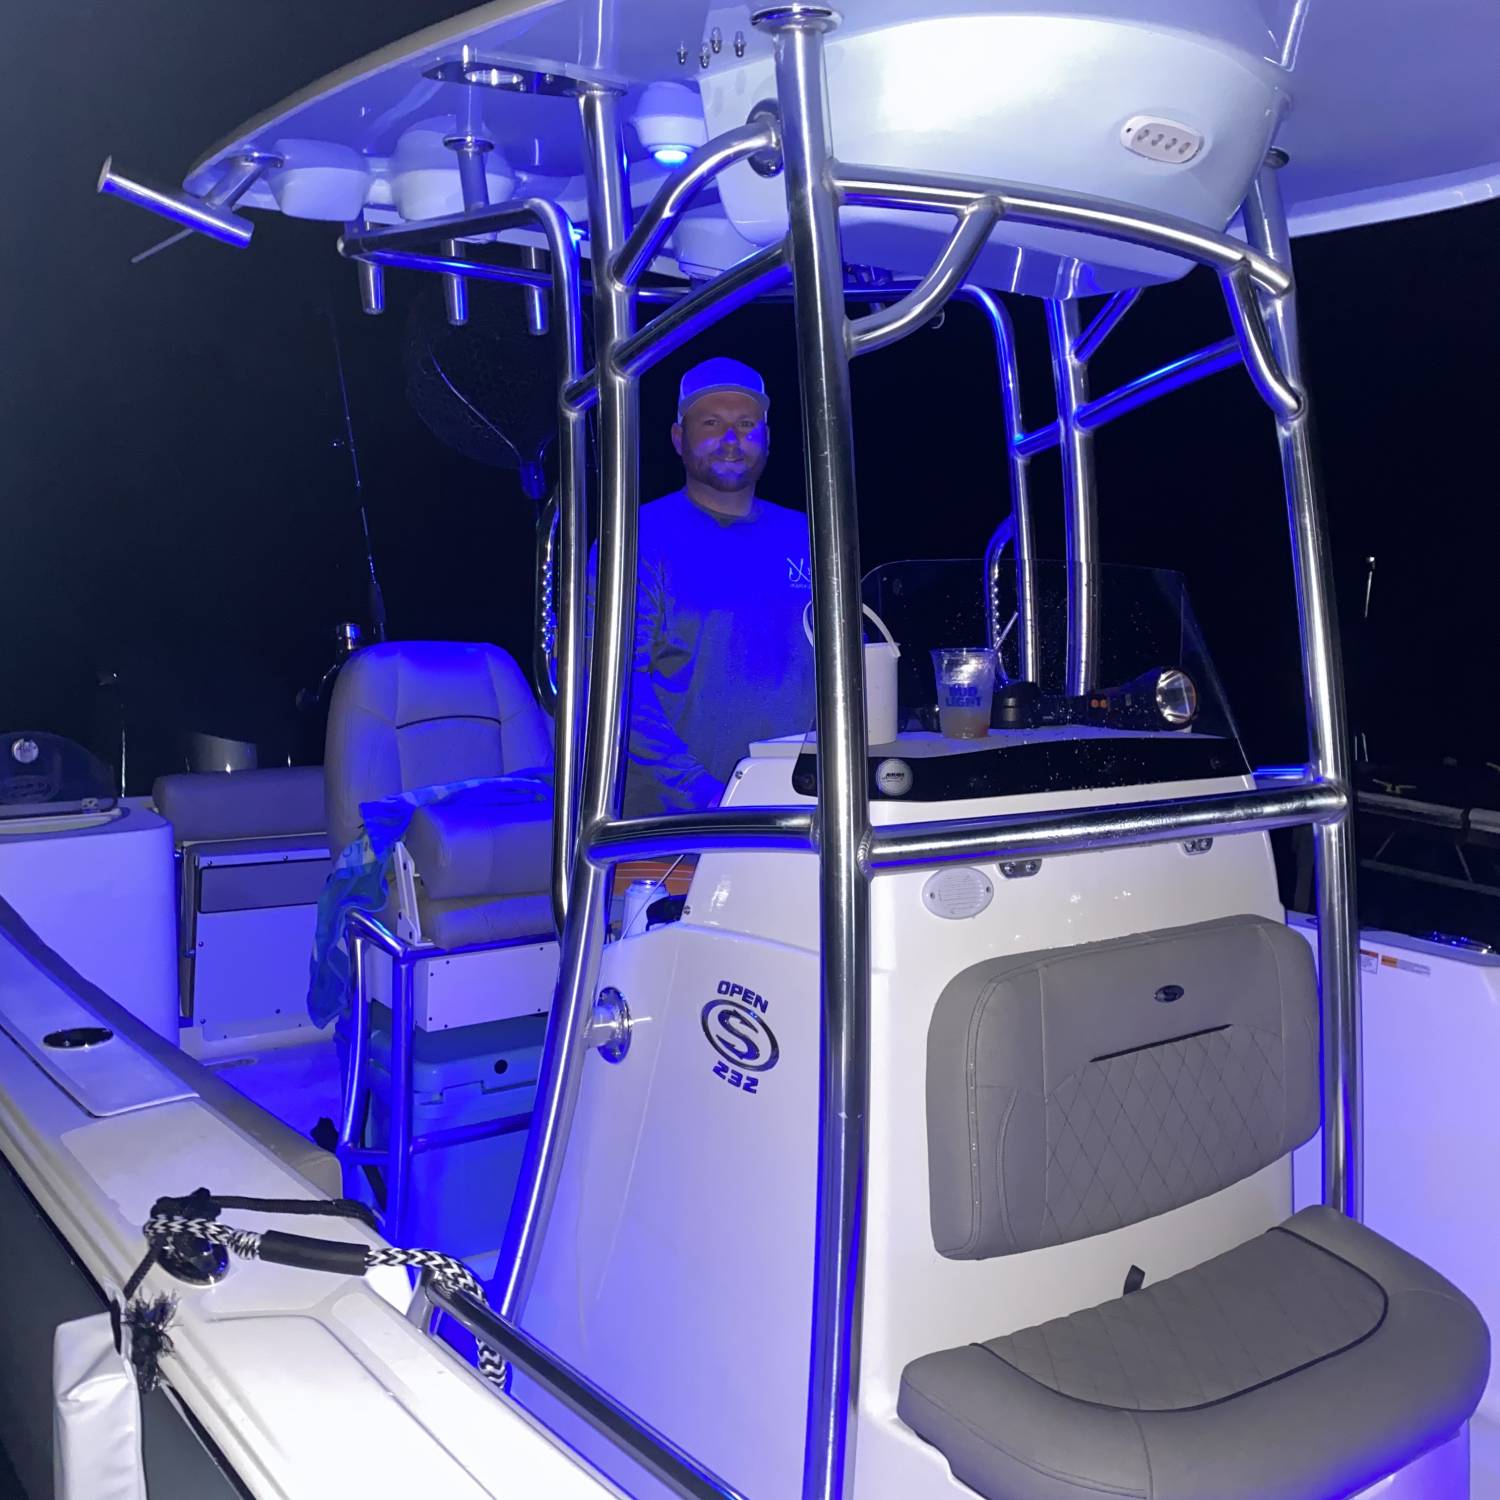 Title: Late night cruise - On board their Sportsman Open 232 Center Console - Location: Lake Lanier. Participating in the Photo Contest #SportsmanFebruary2022